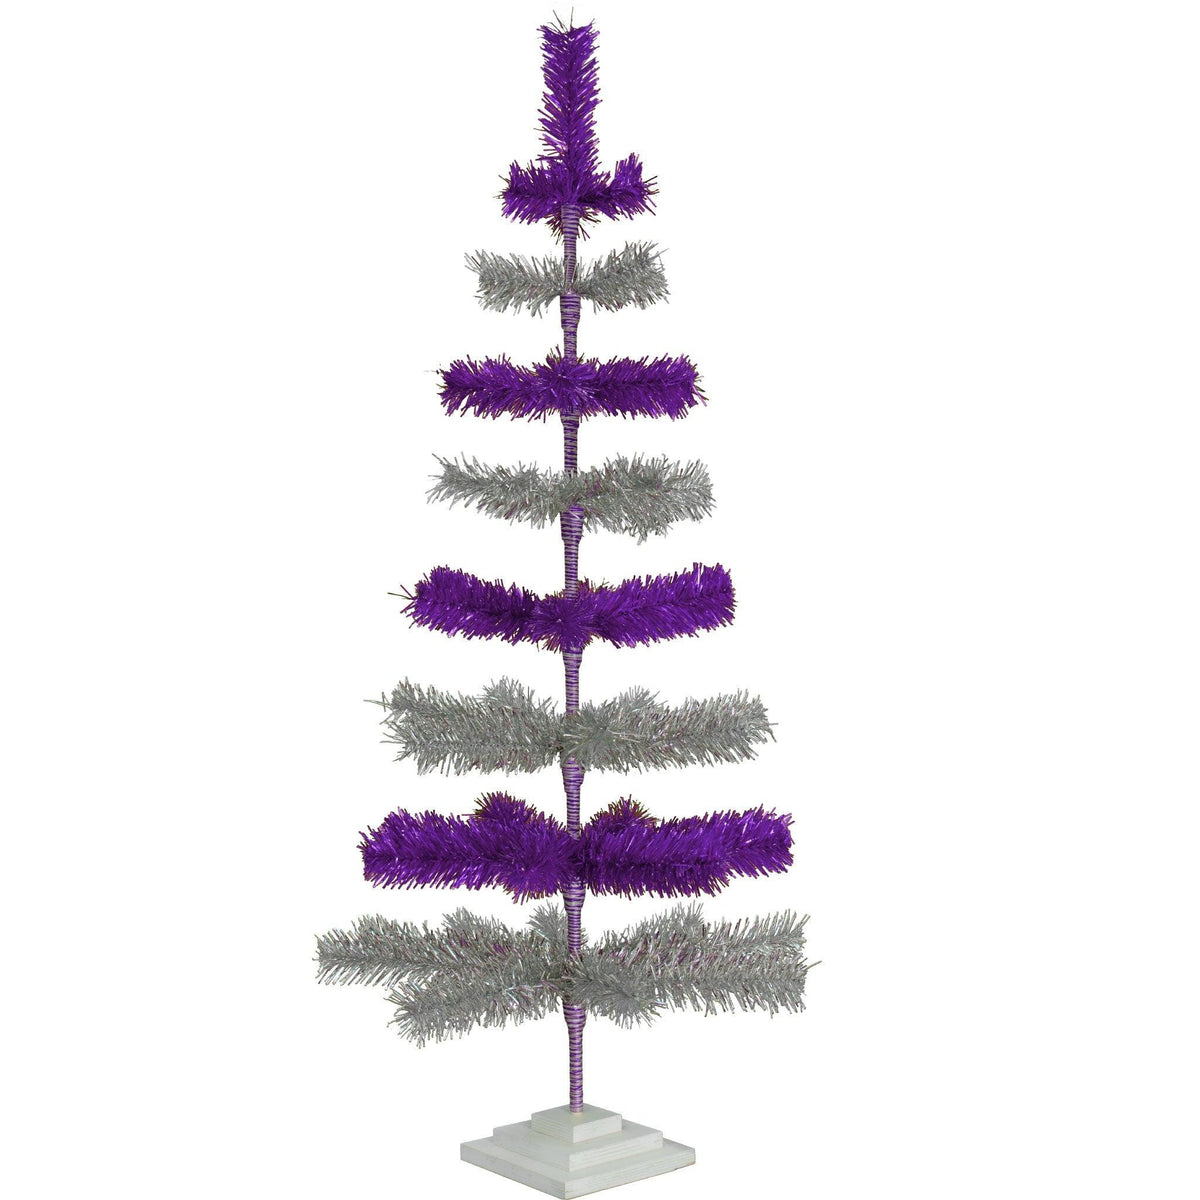 48in Tall Purple & Silver Layered Tinsel Christmas Trees! Decorate for the holidays with a Shiny Purple and Metallic Silver retro-style Christmas Tree. On sale now at leedisplay.com